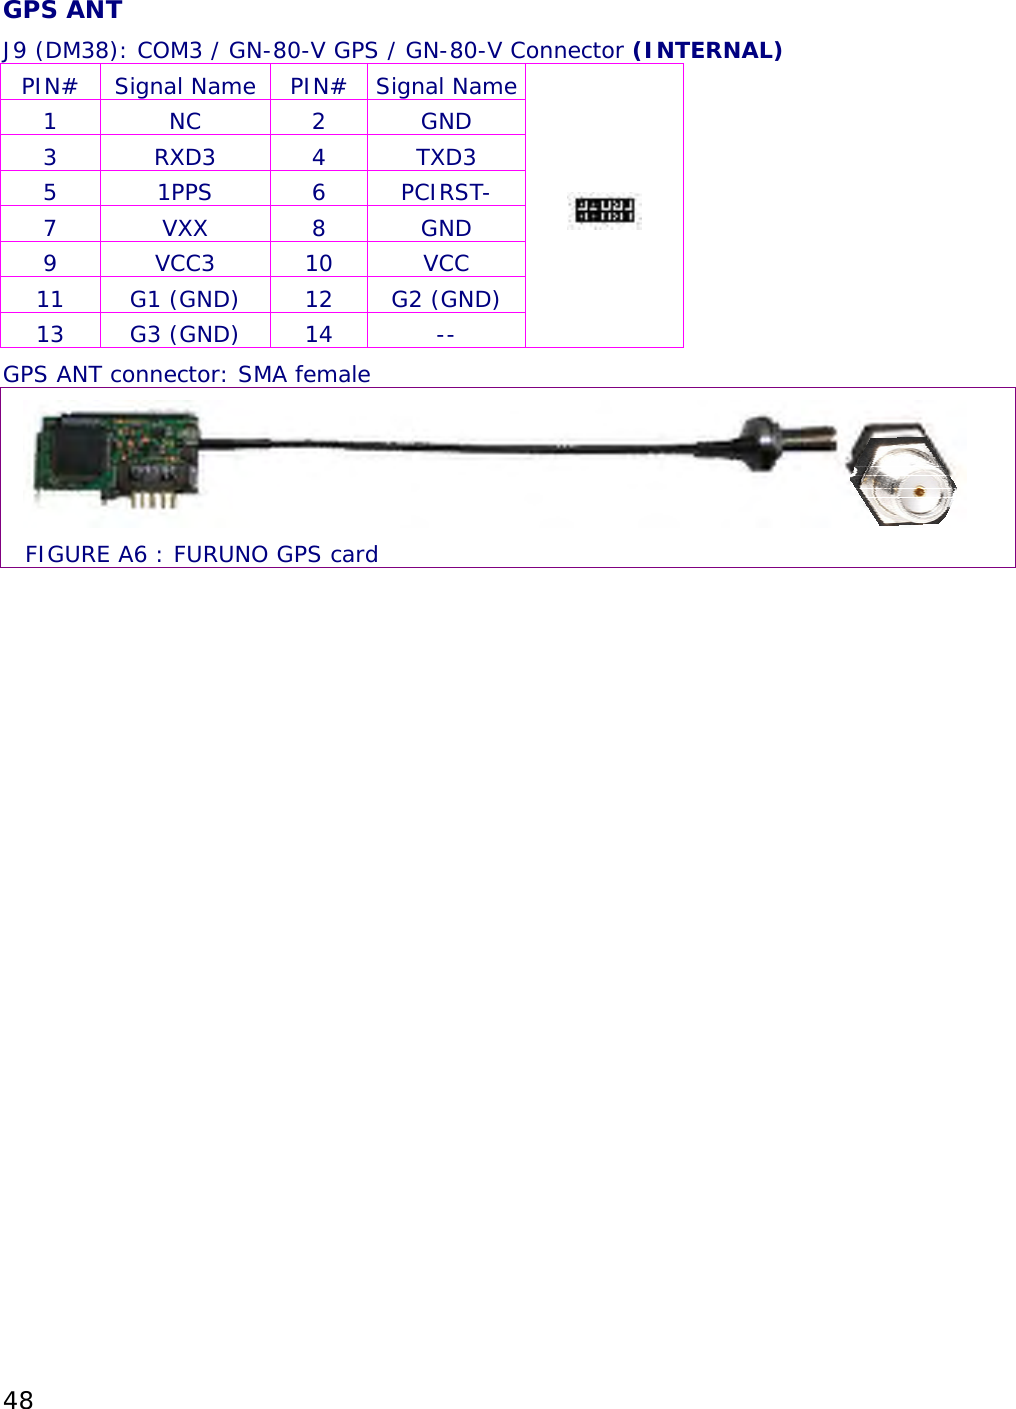 48 GPS ANT J9 (DM38): COM3 / GN-80-V GPS / GN-80-V Connector (INTERNAL) PIN# Signal Name PIN# Signal Name 1 NC 2 GND 3 RXD3 4 TXD3 5 1PPS 6 PCIRST- 7 VXX 8 GND 9 VCC3 10 VCC 11  G1 (GND)  12  G2 (GND) 13 G3 (GND) 14  --  GPS ANT connector: SMA female  FIGURE A6 : FURUNO GPS card  